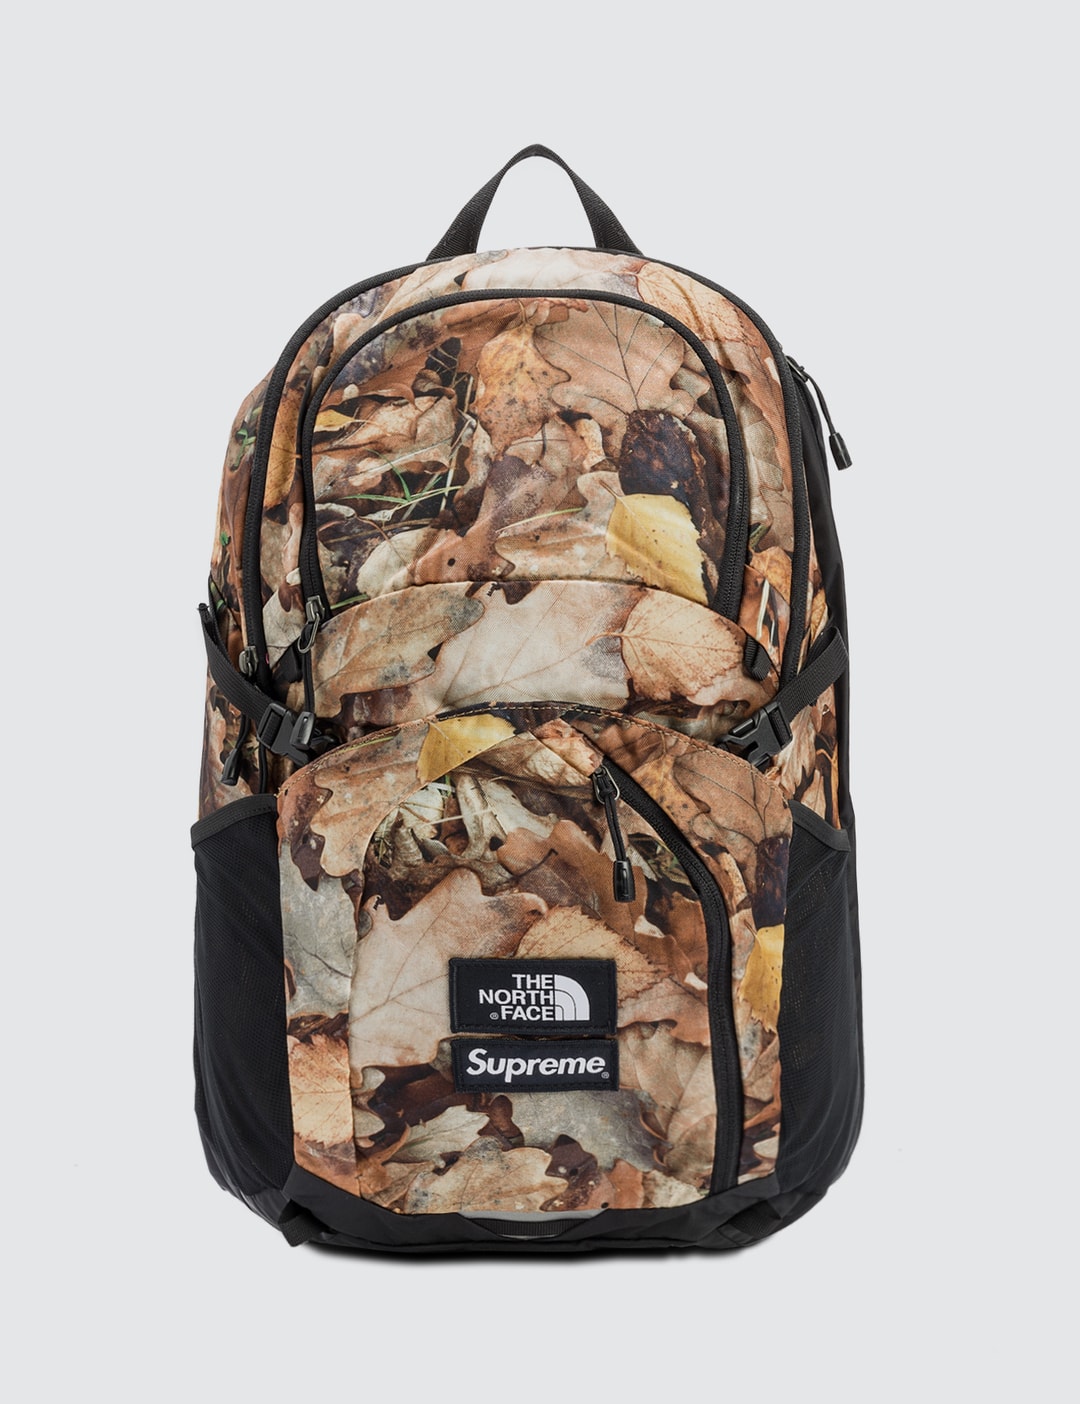 Supreme - North Face X Supreme Backpack "Tree Camo" | HBX - Globally Curated Fashion and Lifestyle by Hypebeast